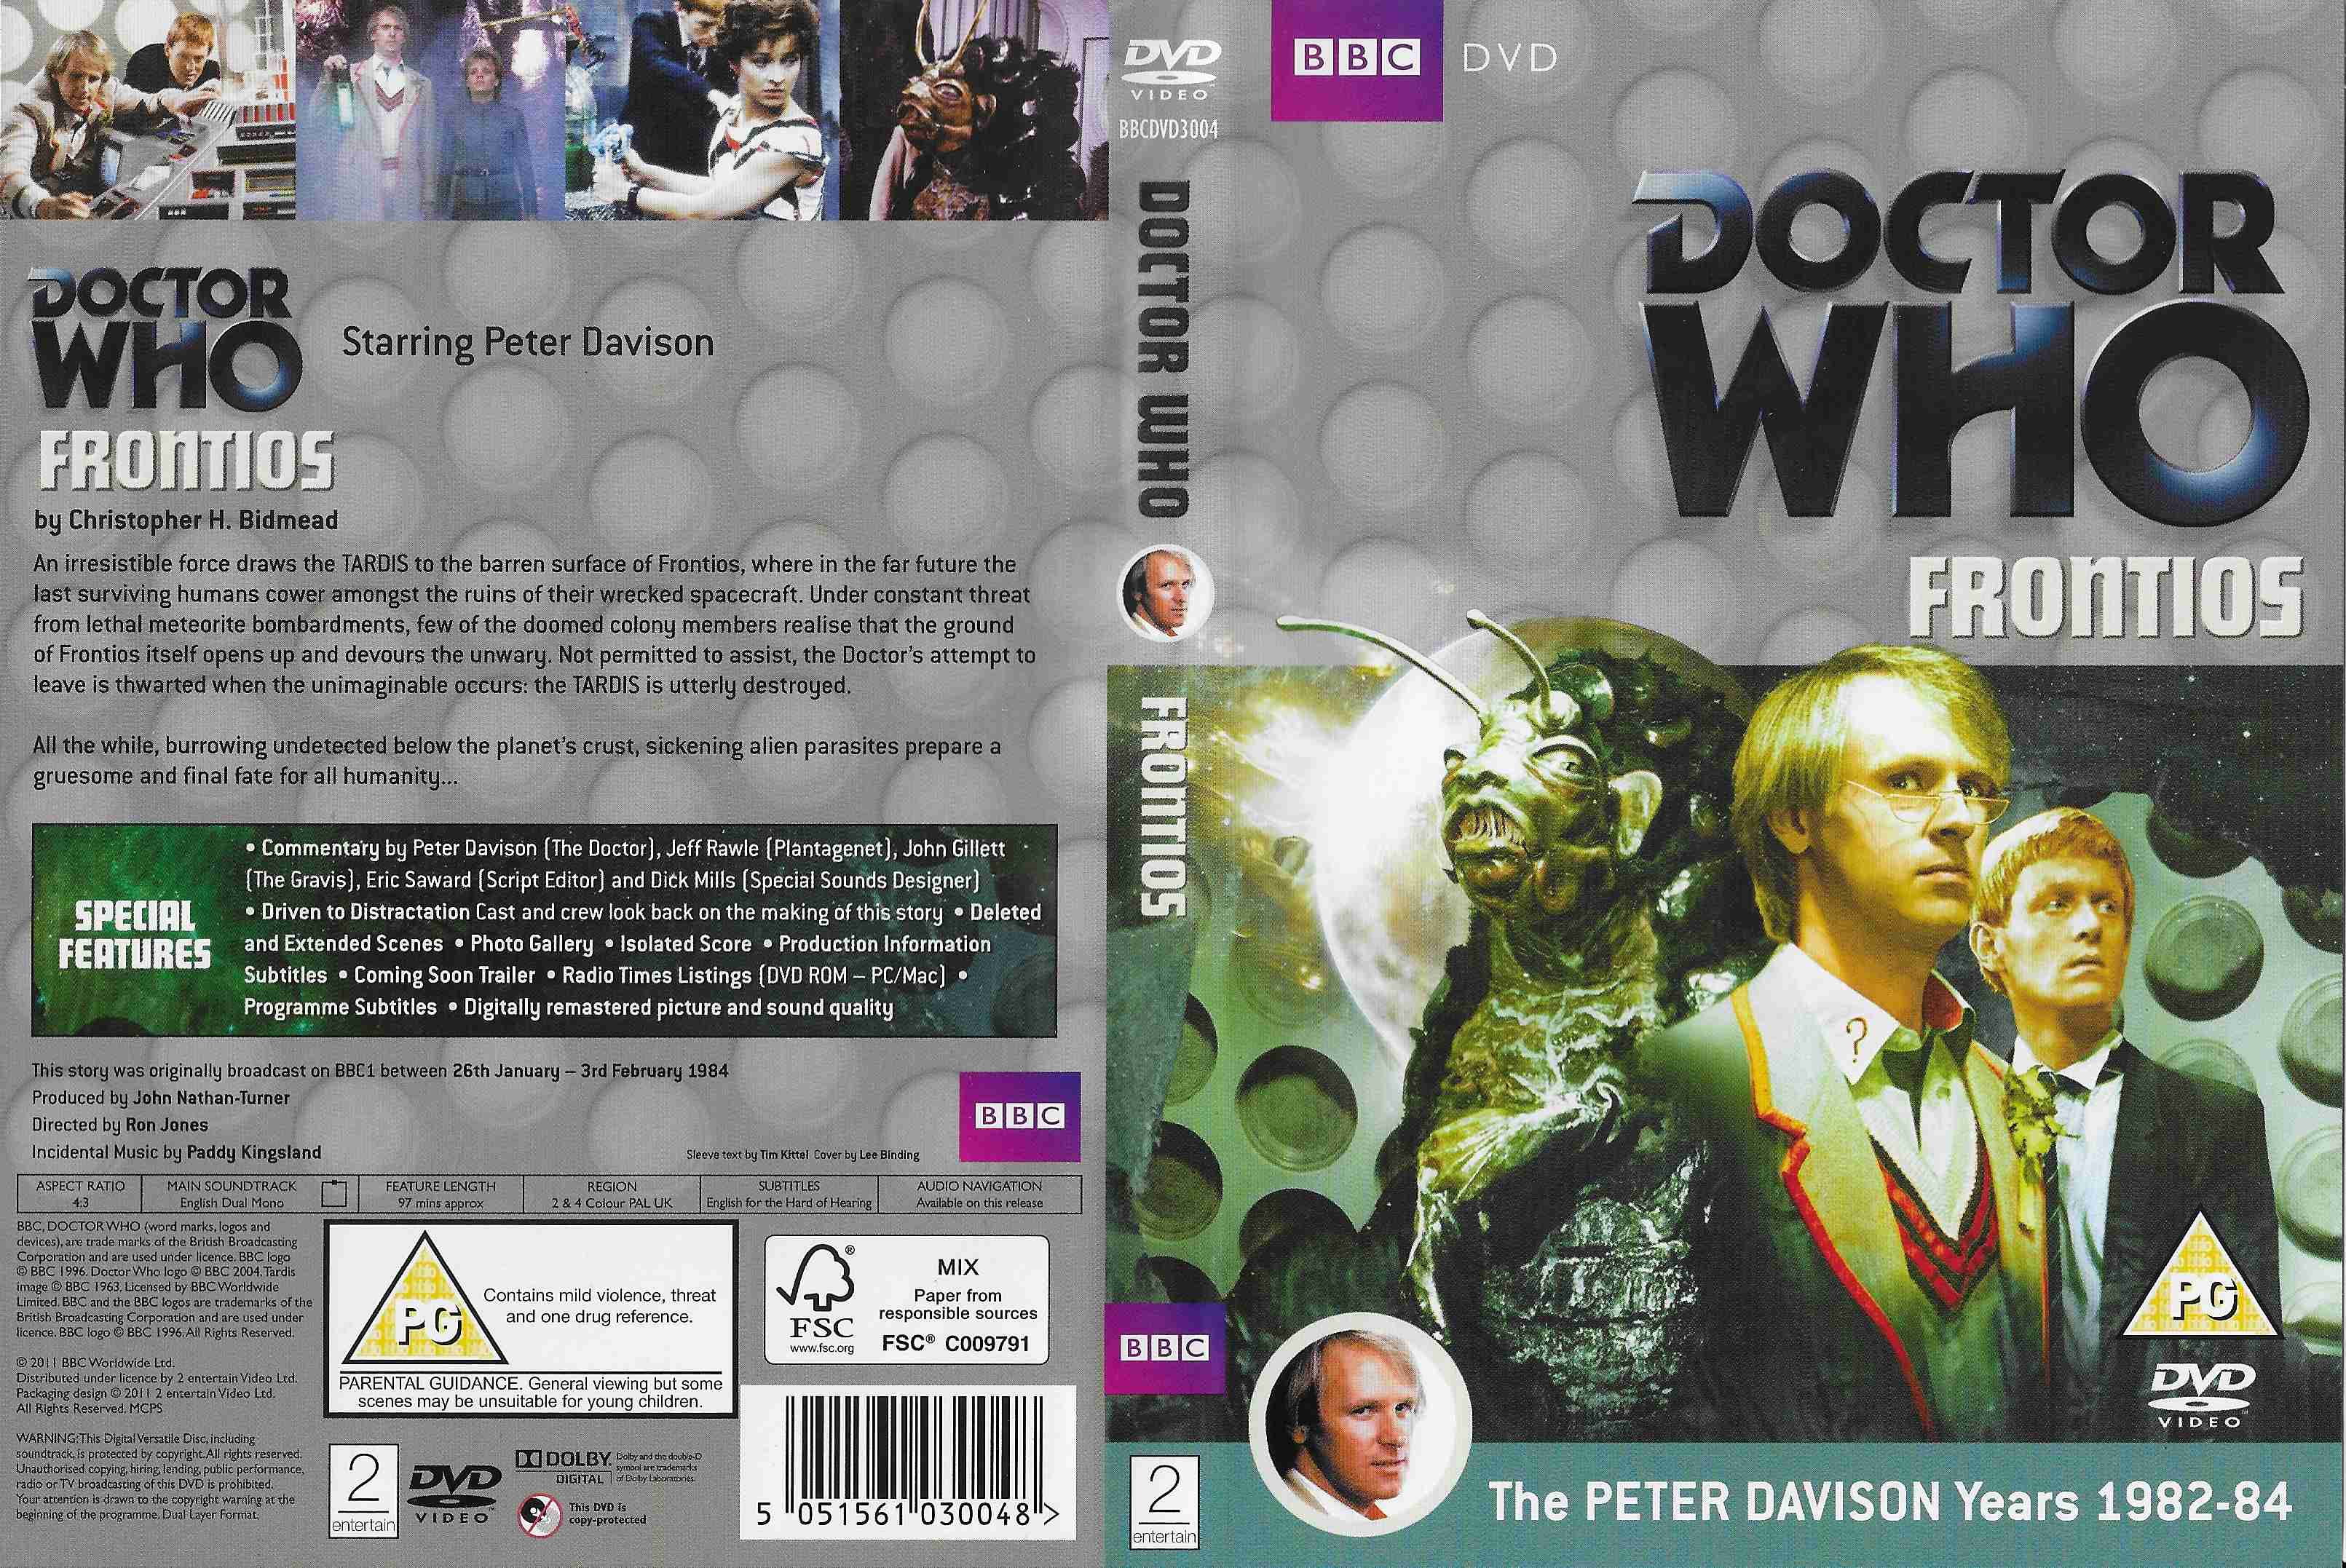 Picture of BBCDVD 3004 Doctor Who - Frontios by artist Christopher H. Bedmead from the BBC records and Tapes library